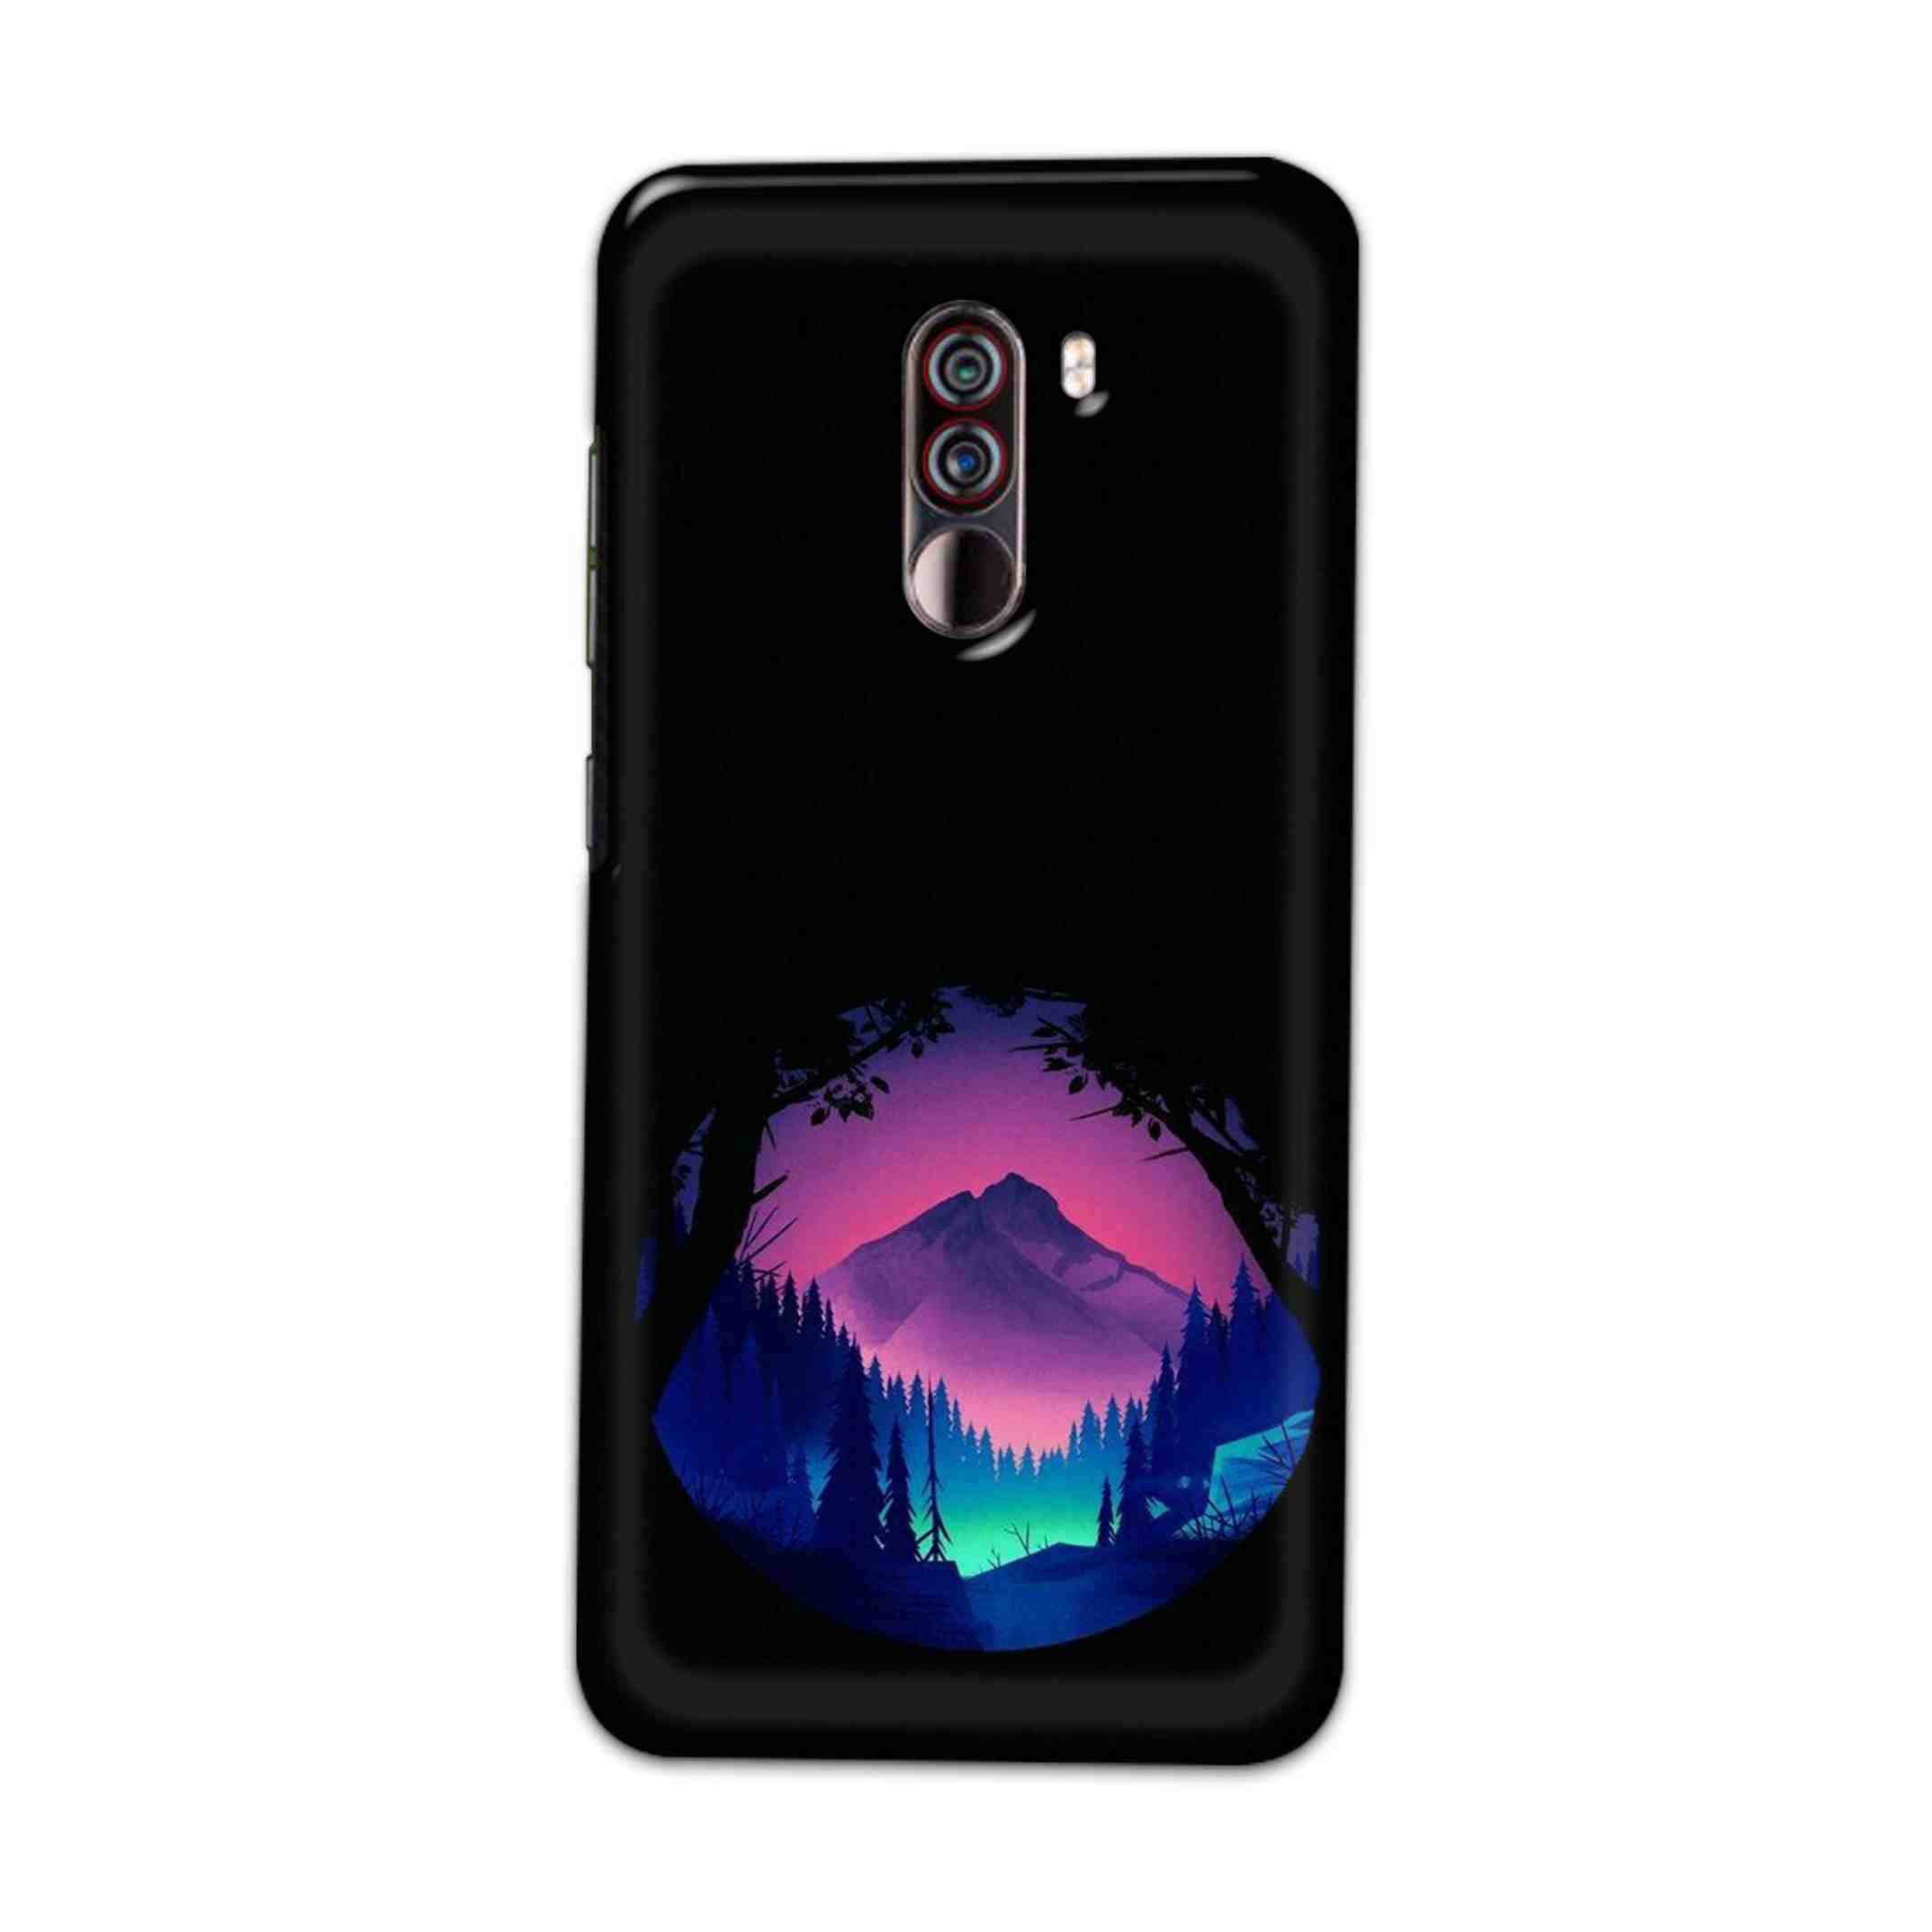 Buy Neon Tables Hard Back Mobile Phone Case Cover For Xiaomi Pocophone F1 Online